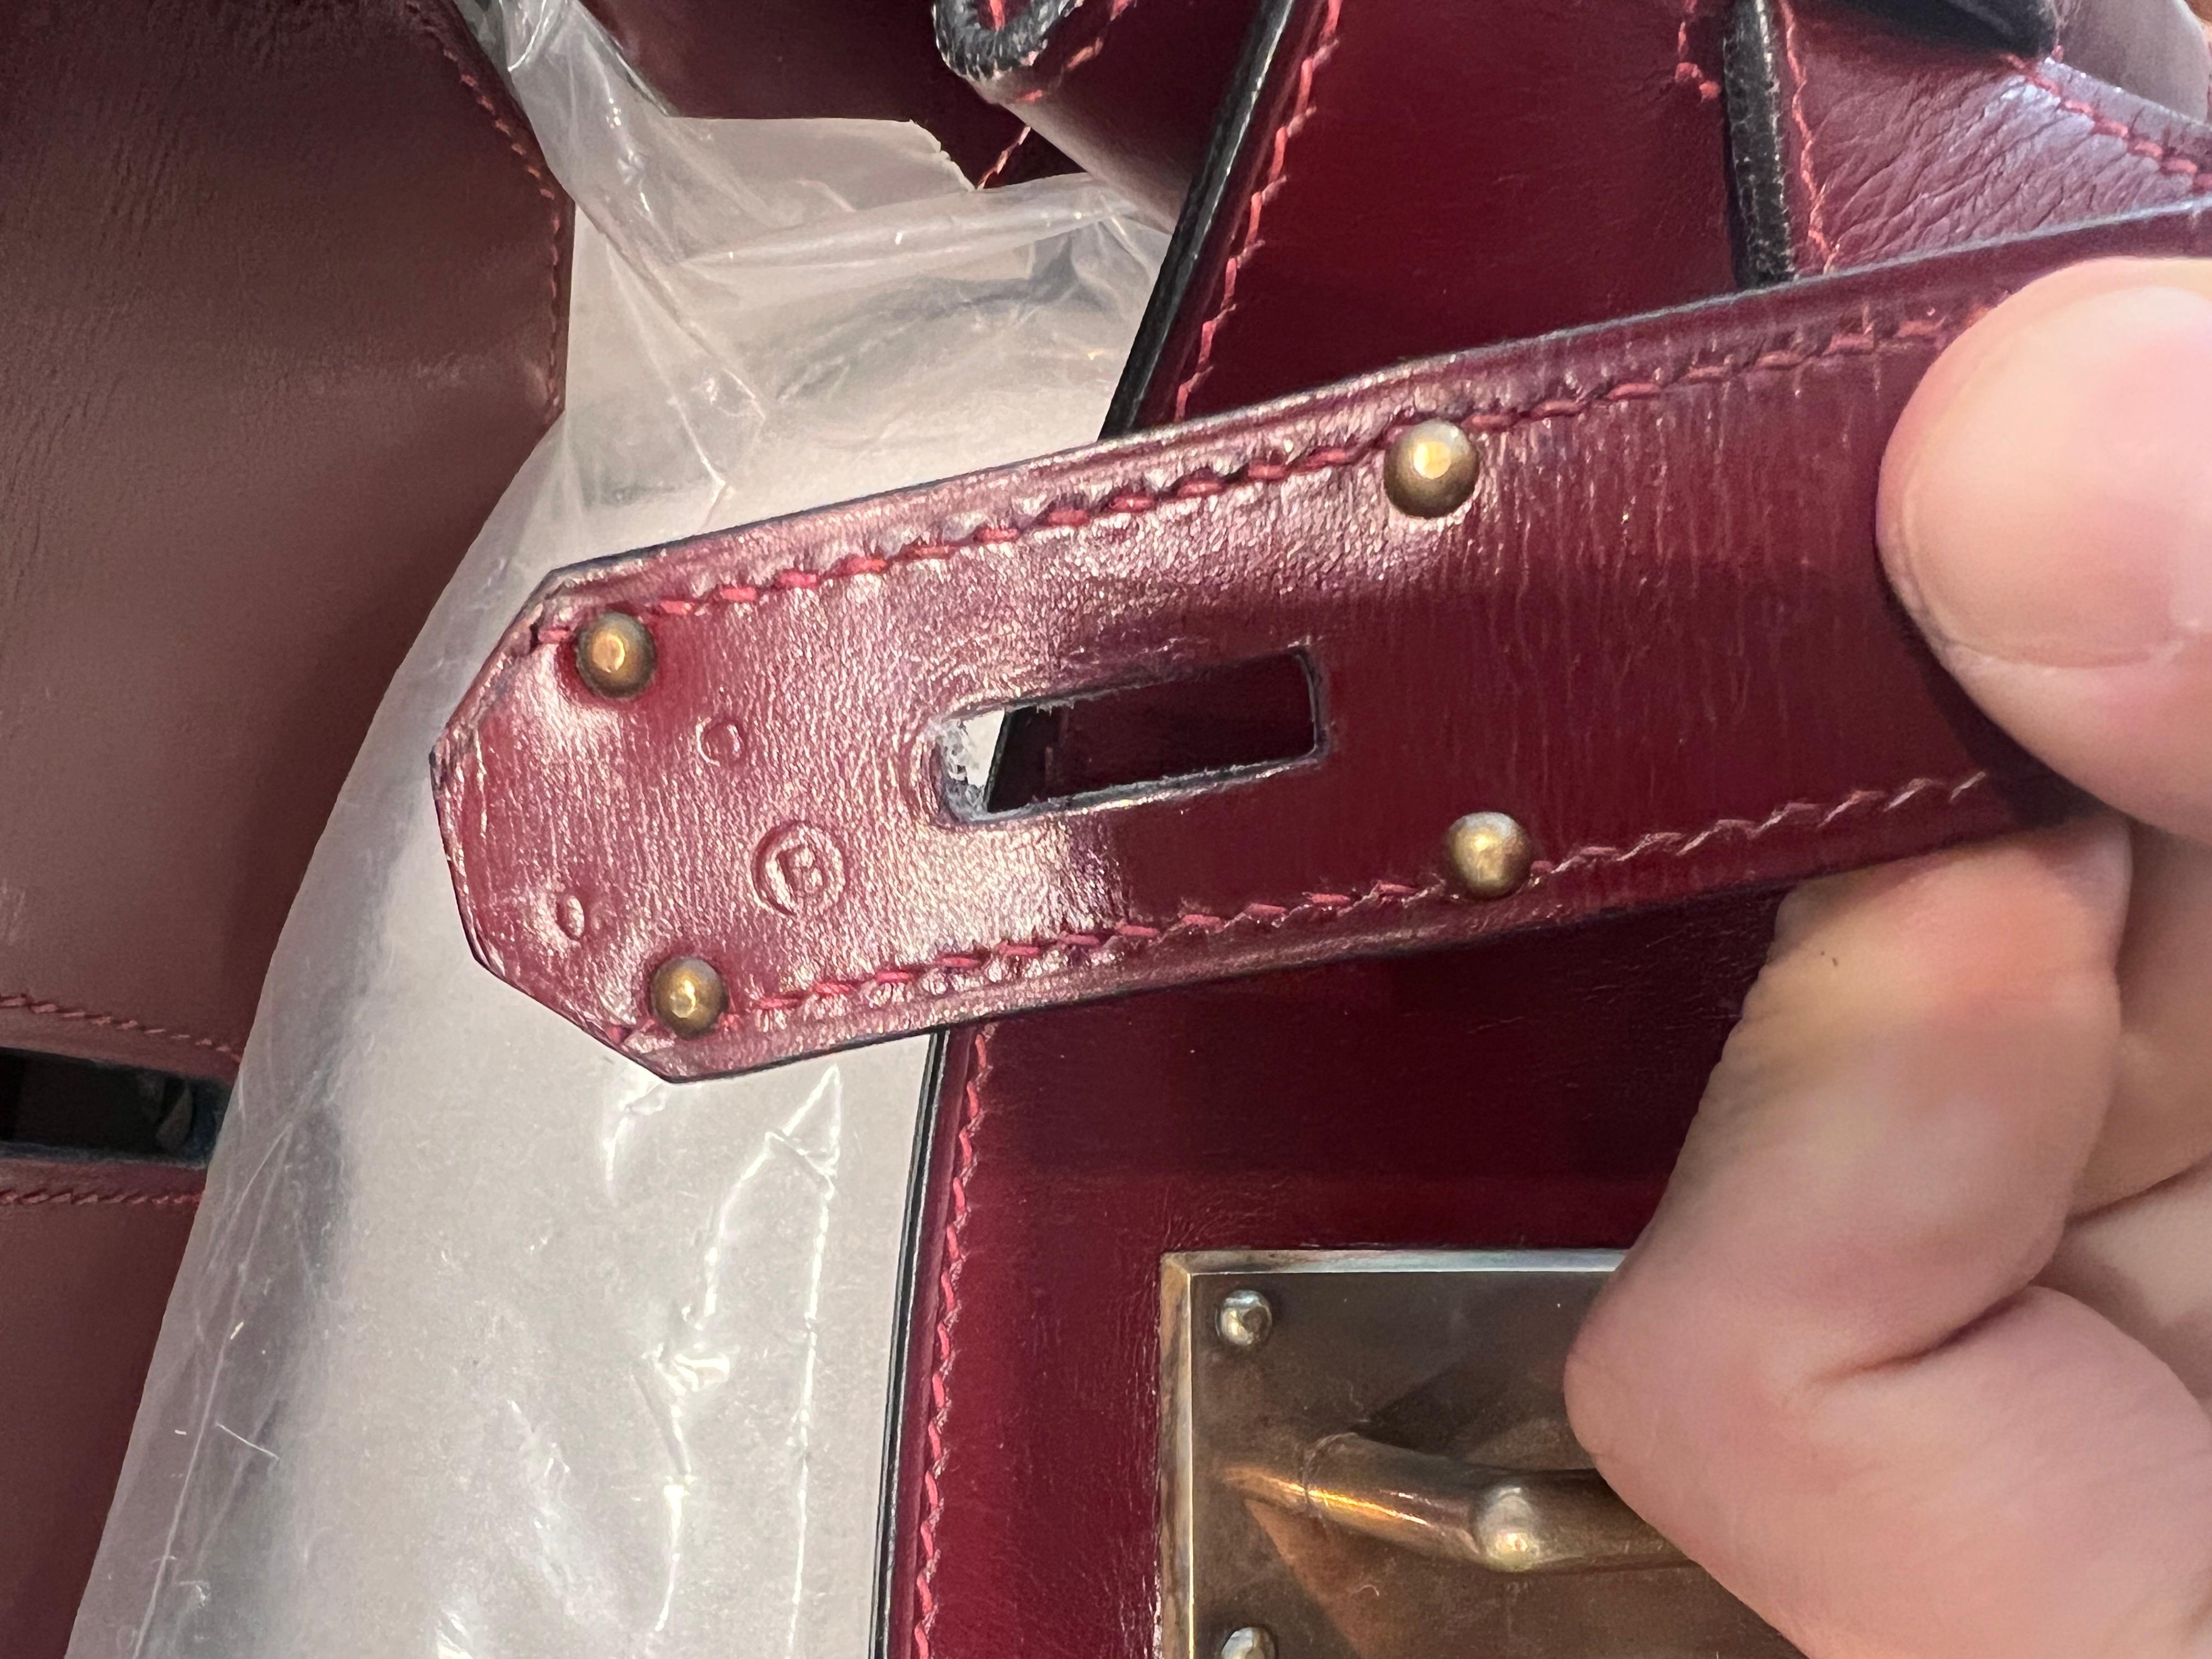 Vintage Hermes HAC in burgundy box leather.
Fair condition: signs of use in the handles ( light cracking and one hand slightly weak)
Bottom of the bag presents a defect that must be repaired (hole in 2 corners) Cracking in leather
Comes witg